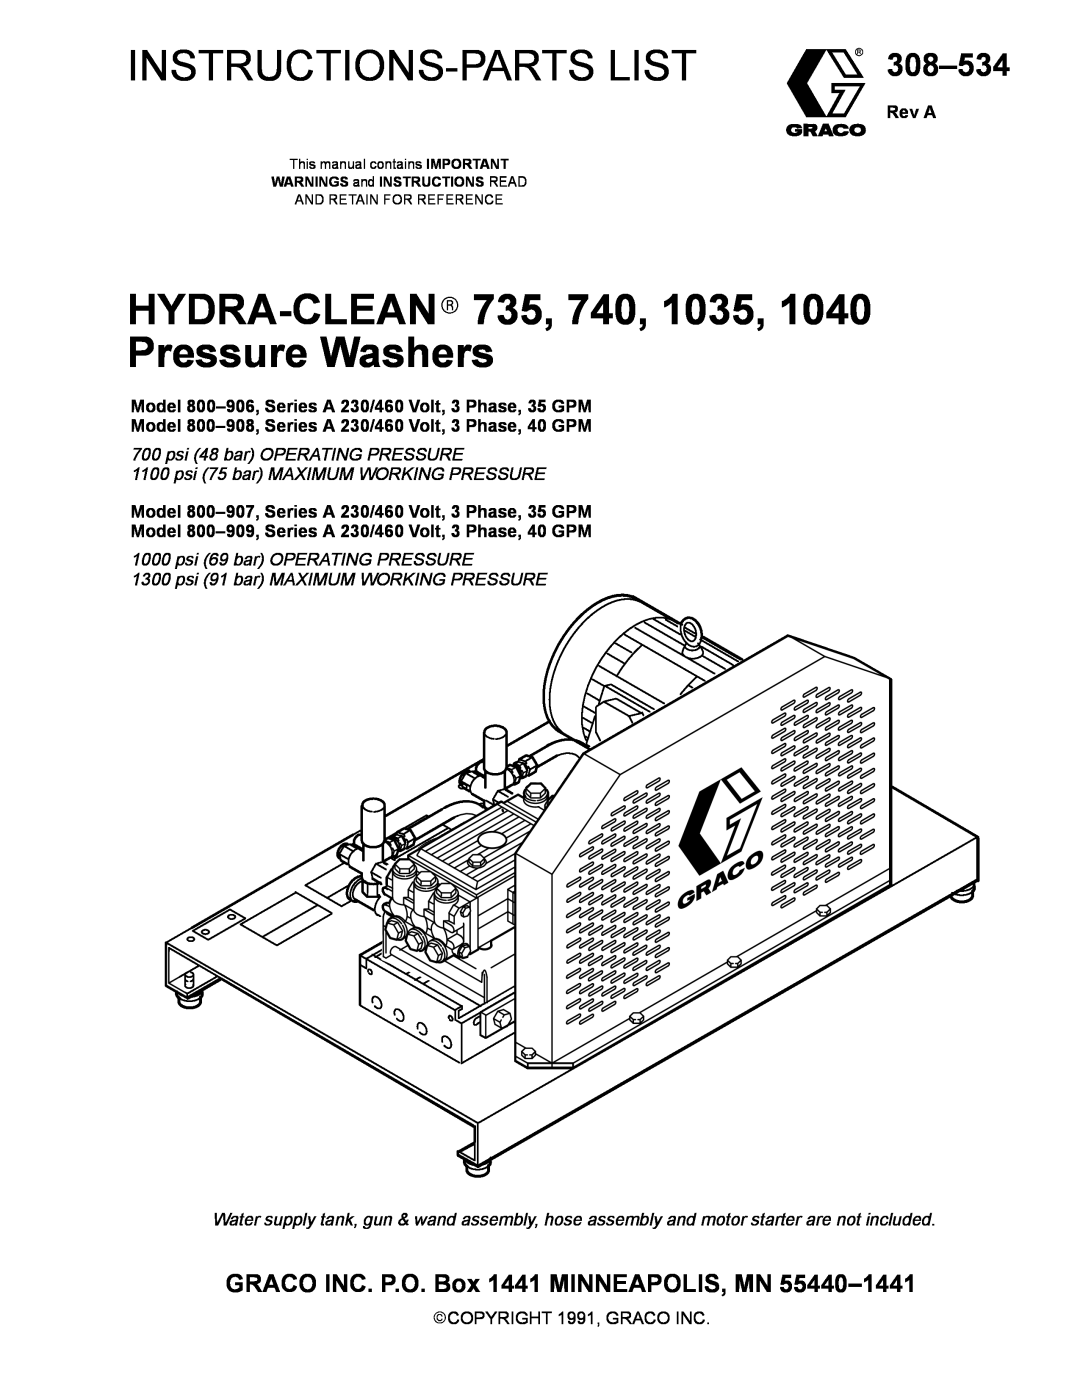 Graco Inc 800-909, 800-906, 1040 manual Instructions-Parts List, HYDRA-CLEAN 735, 740, 1035 Pressure Washers, 308-534 